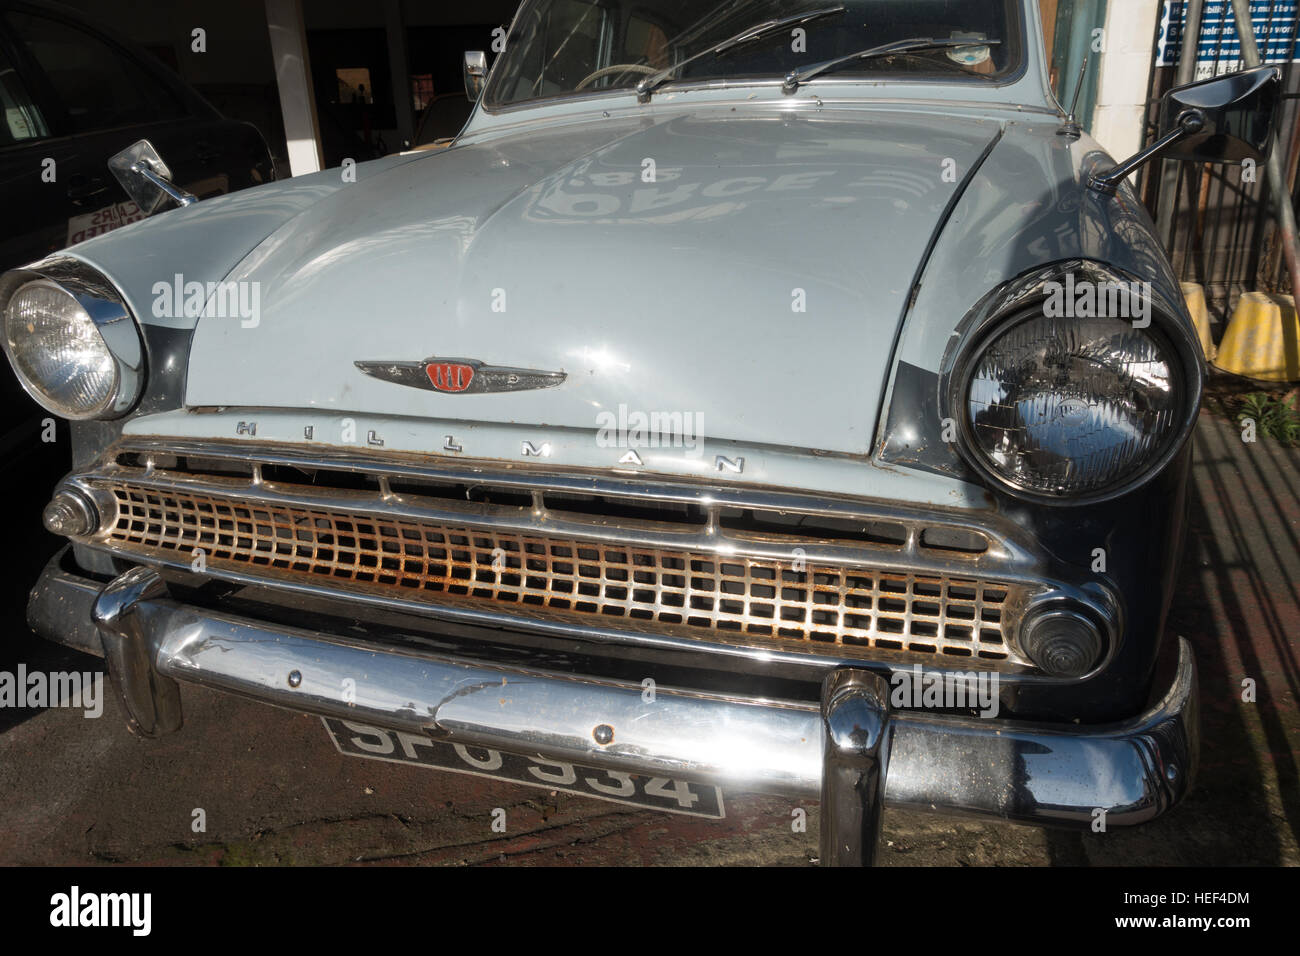 The front grille of an old Hillman Minx car. Stock Photo